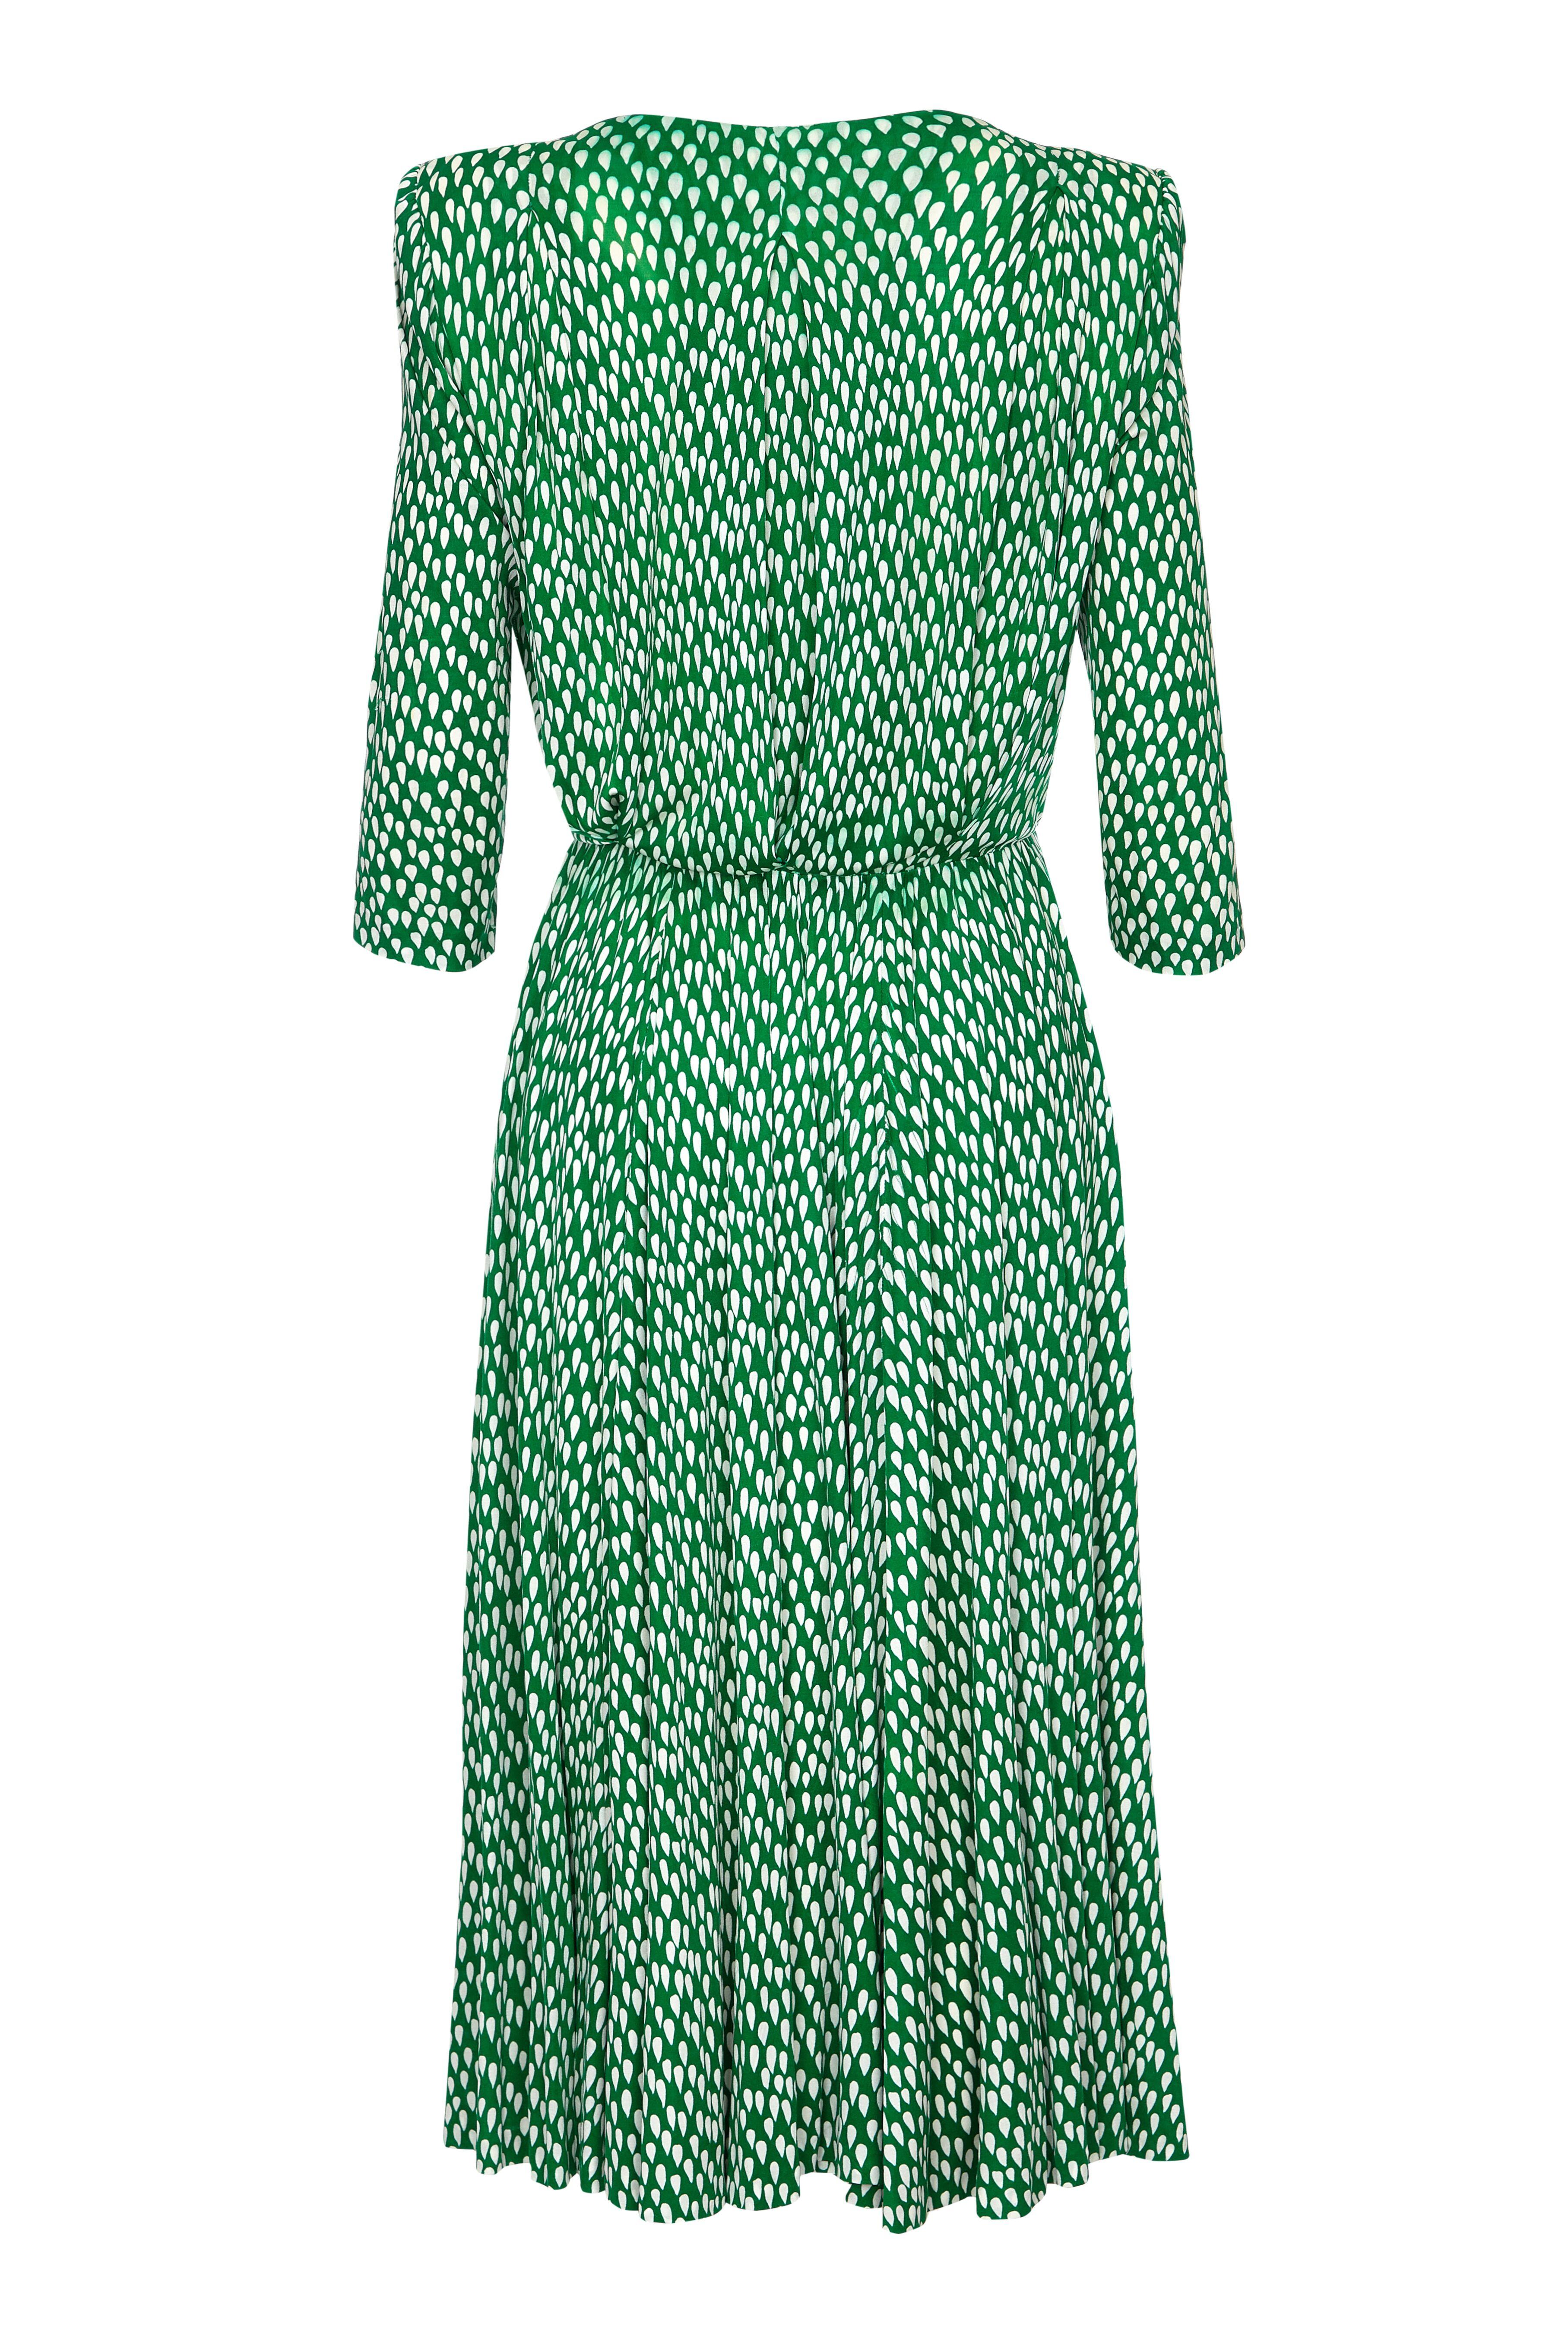 This beautiful silk dress in forest green by Christian Dior has the demi - couture Patron label and is circa mid 1980s. The soft silk fabric has an inverted teardrop design and is cut with a plunging crossover bodice and full circle calf length